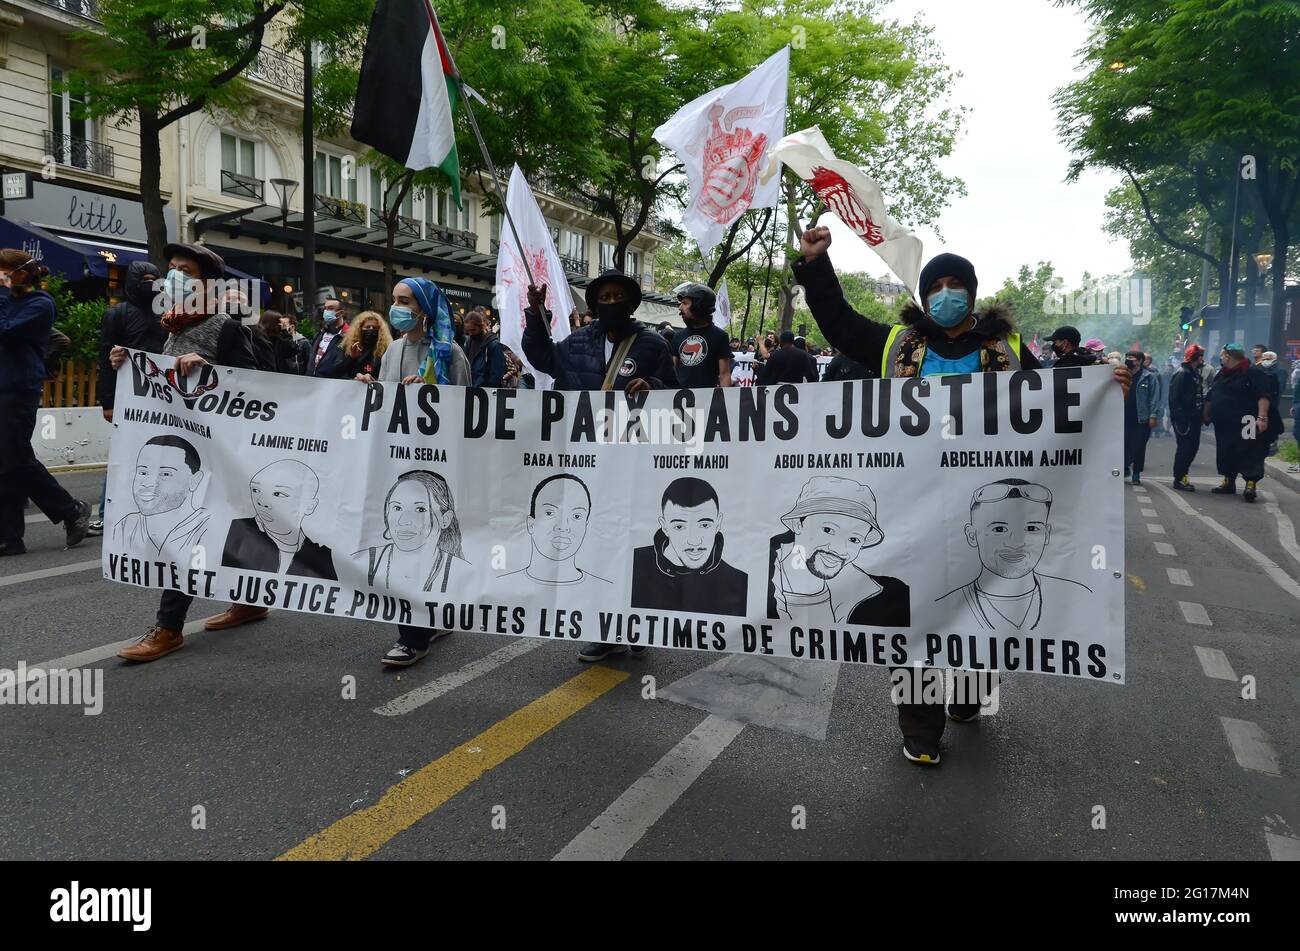 France Paris 1,000 people marched from Place de la Republique to Nation in memory of Clément Méric, a young antifascist murdered in 2013 by skinheads Stock Photo